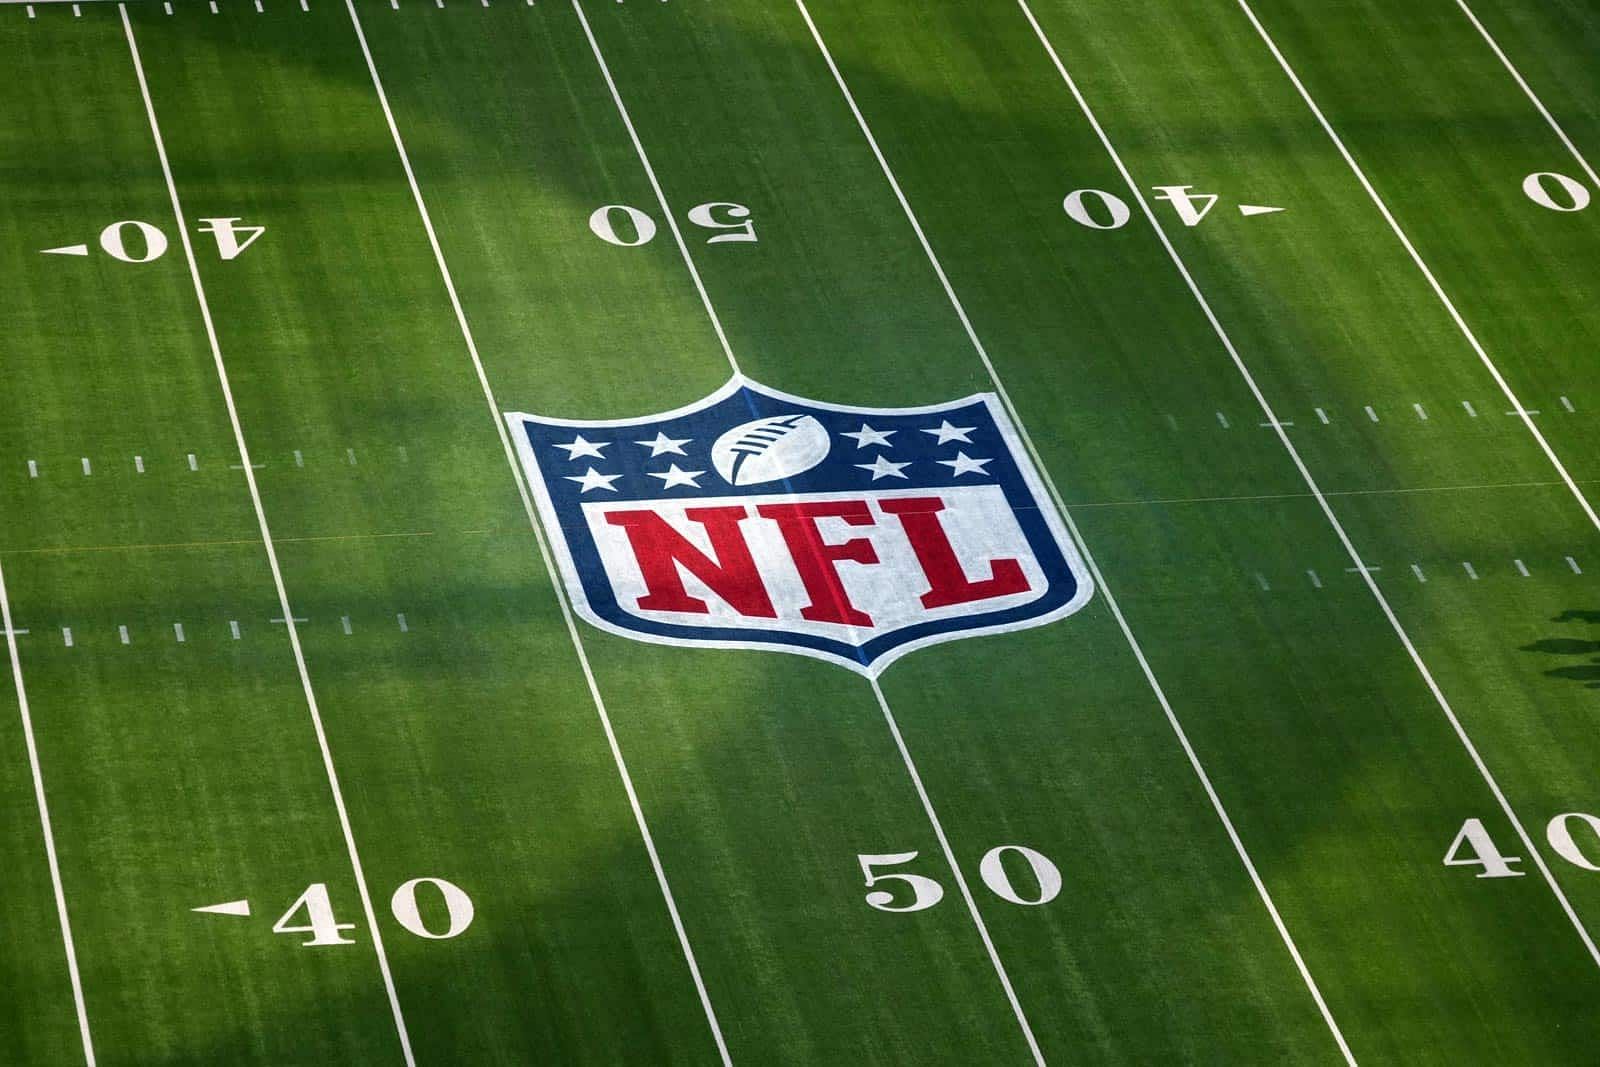 When does the NFL preseason start? How many preseason games are